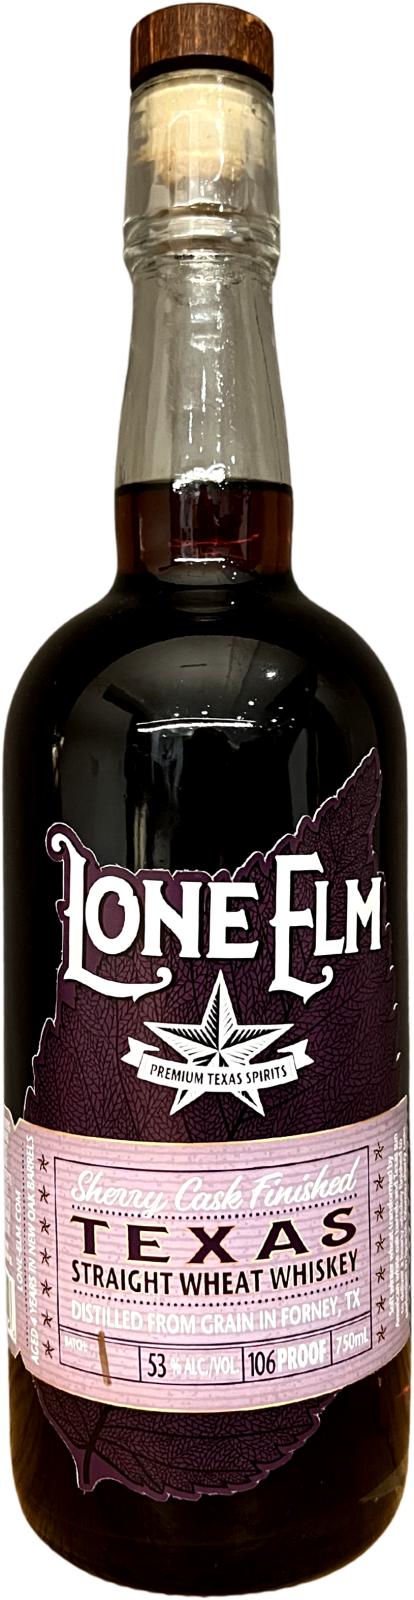 Lone Elm Sherry Cask Finished